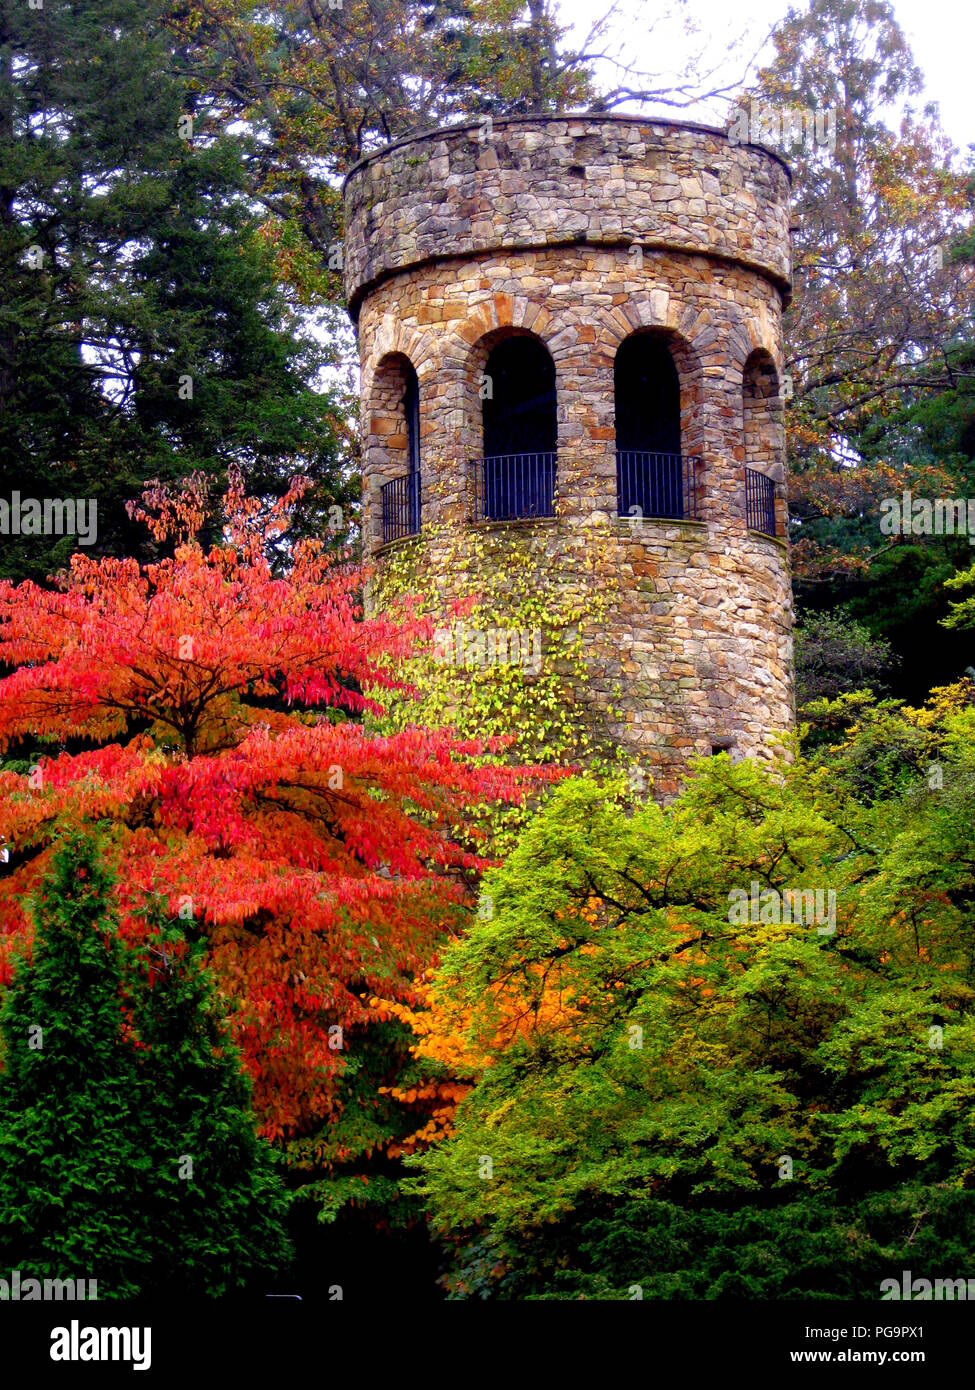 The Bell Tower at Longwood Gardens, Kennett Square Pennsylvania shot in the foreground of Autumn colors. Stock Photo